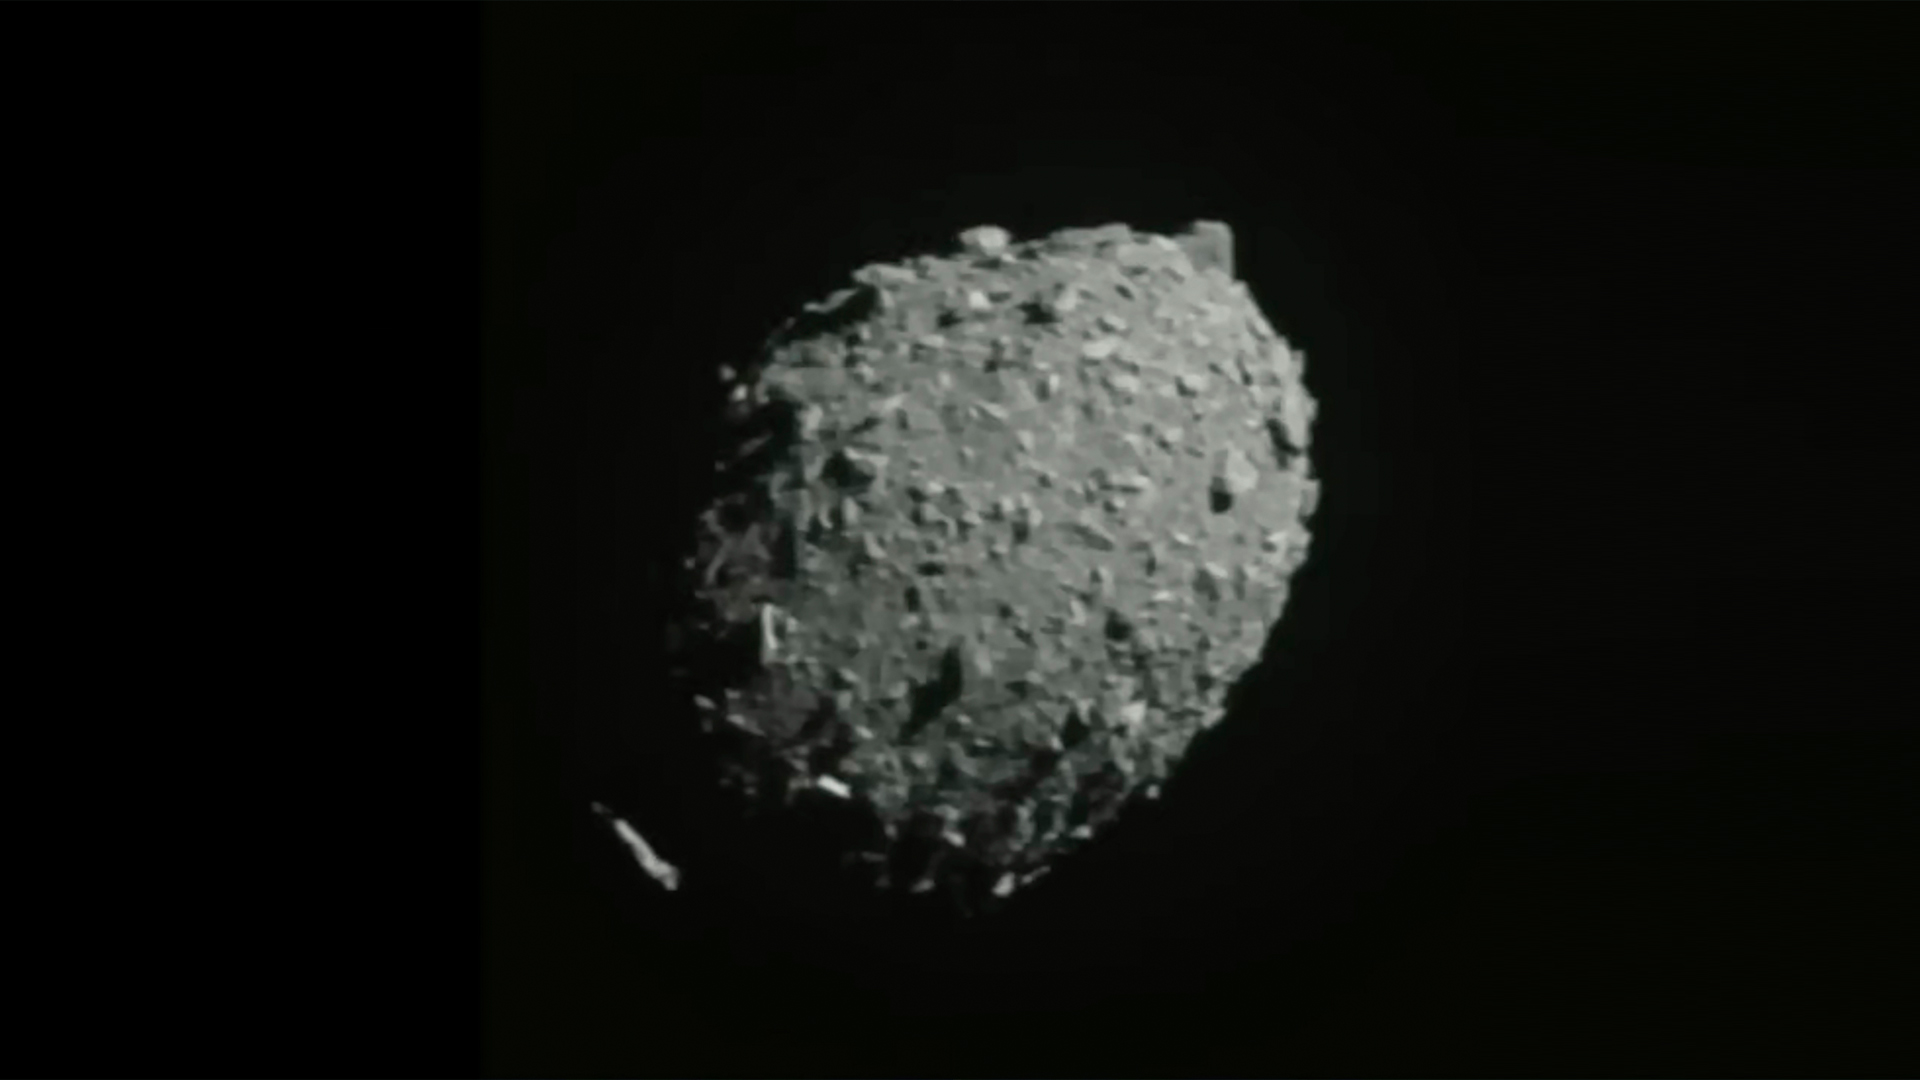 Nasa announces the results of an asteroid-impact test to help protect Earth from threats from space rocks